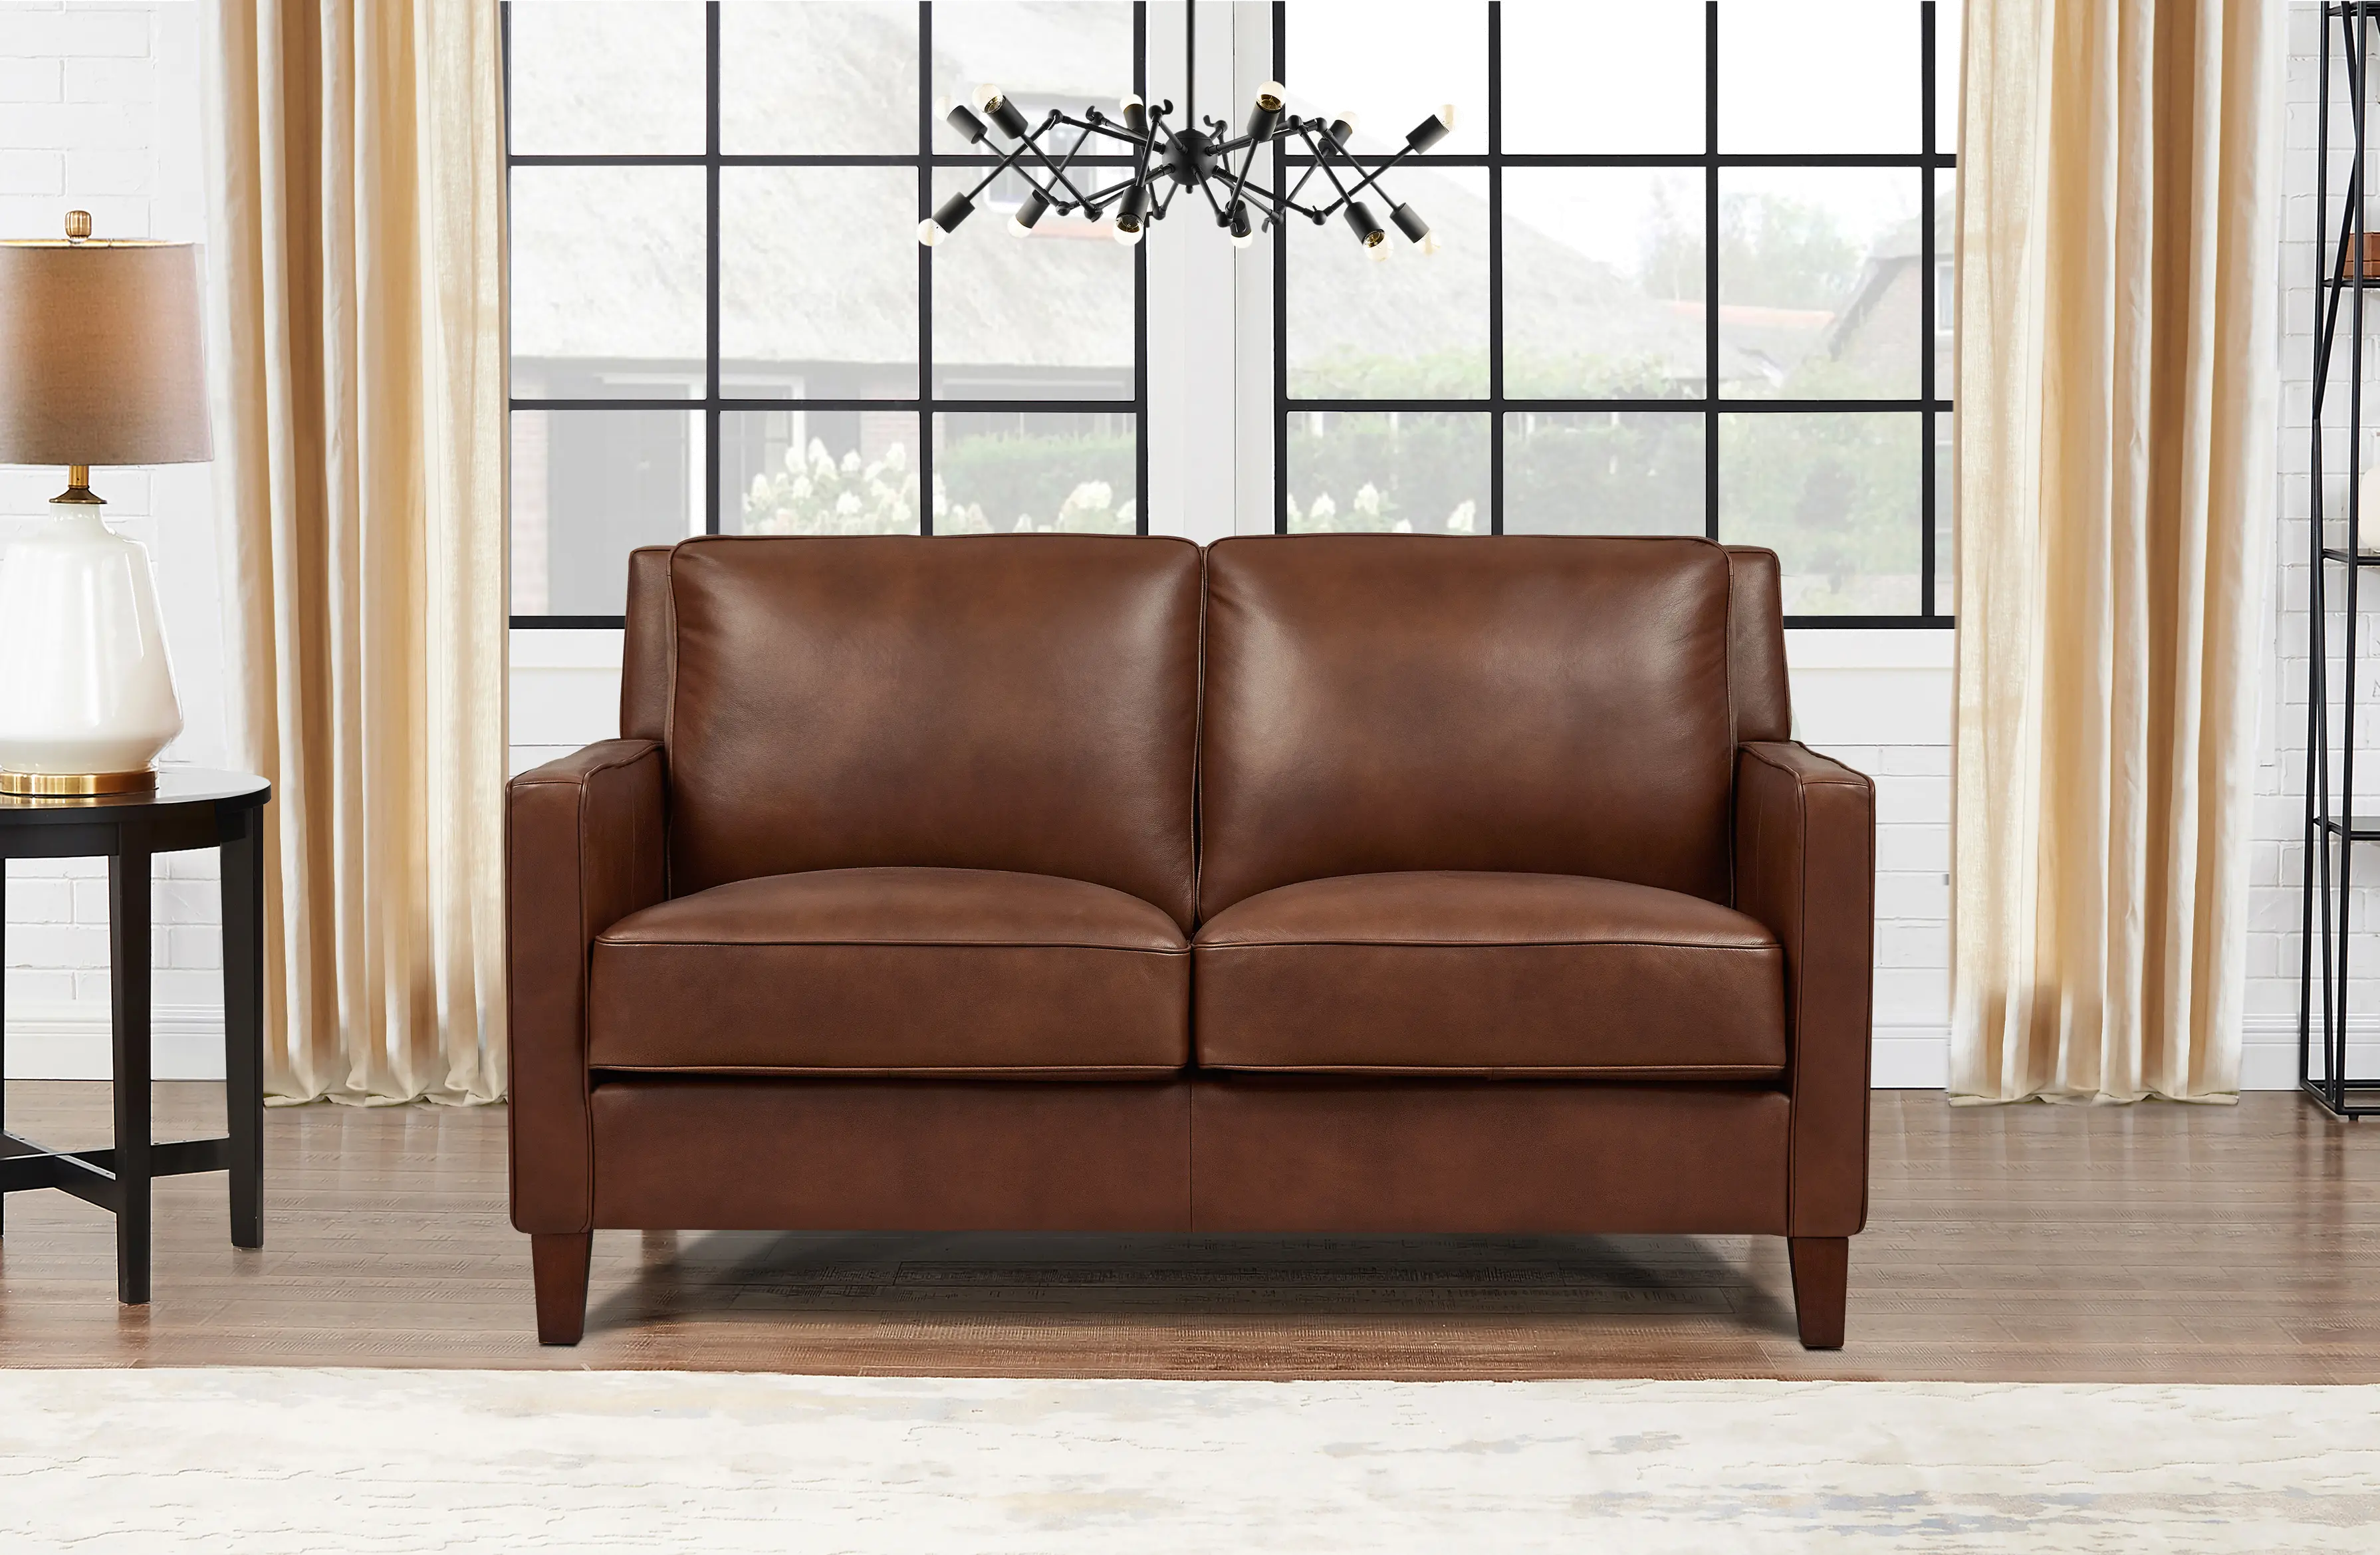 New Haven Tobacco Brown Leather Loveseat - Amax Leather